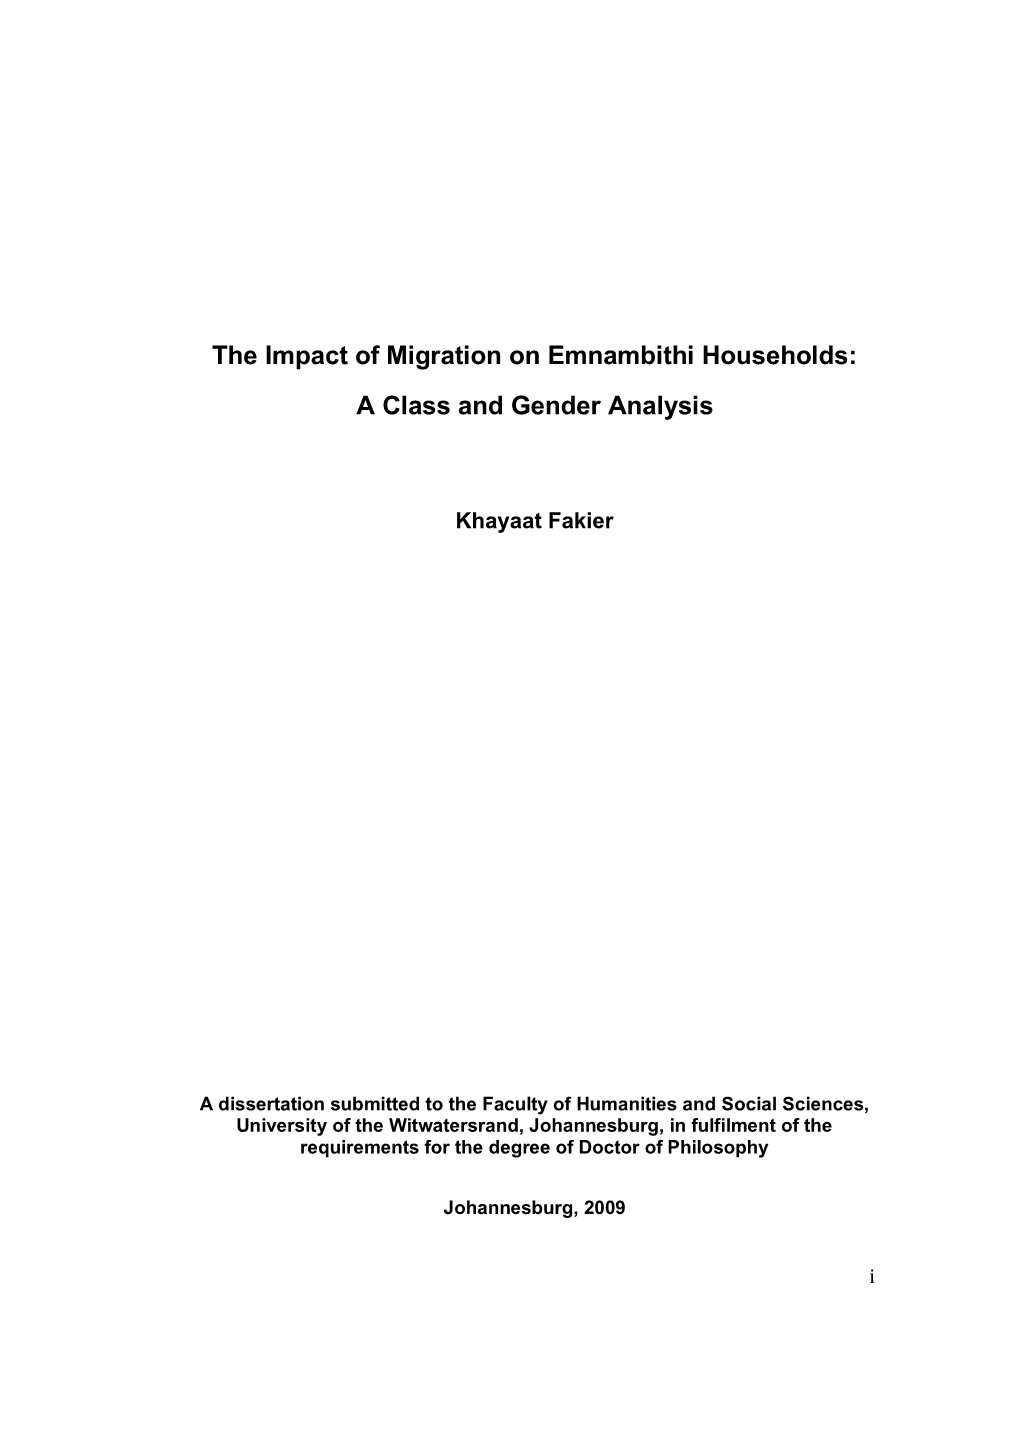 The Impact of Migration on Emnambithi Households: a Class and Gender Analysis